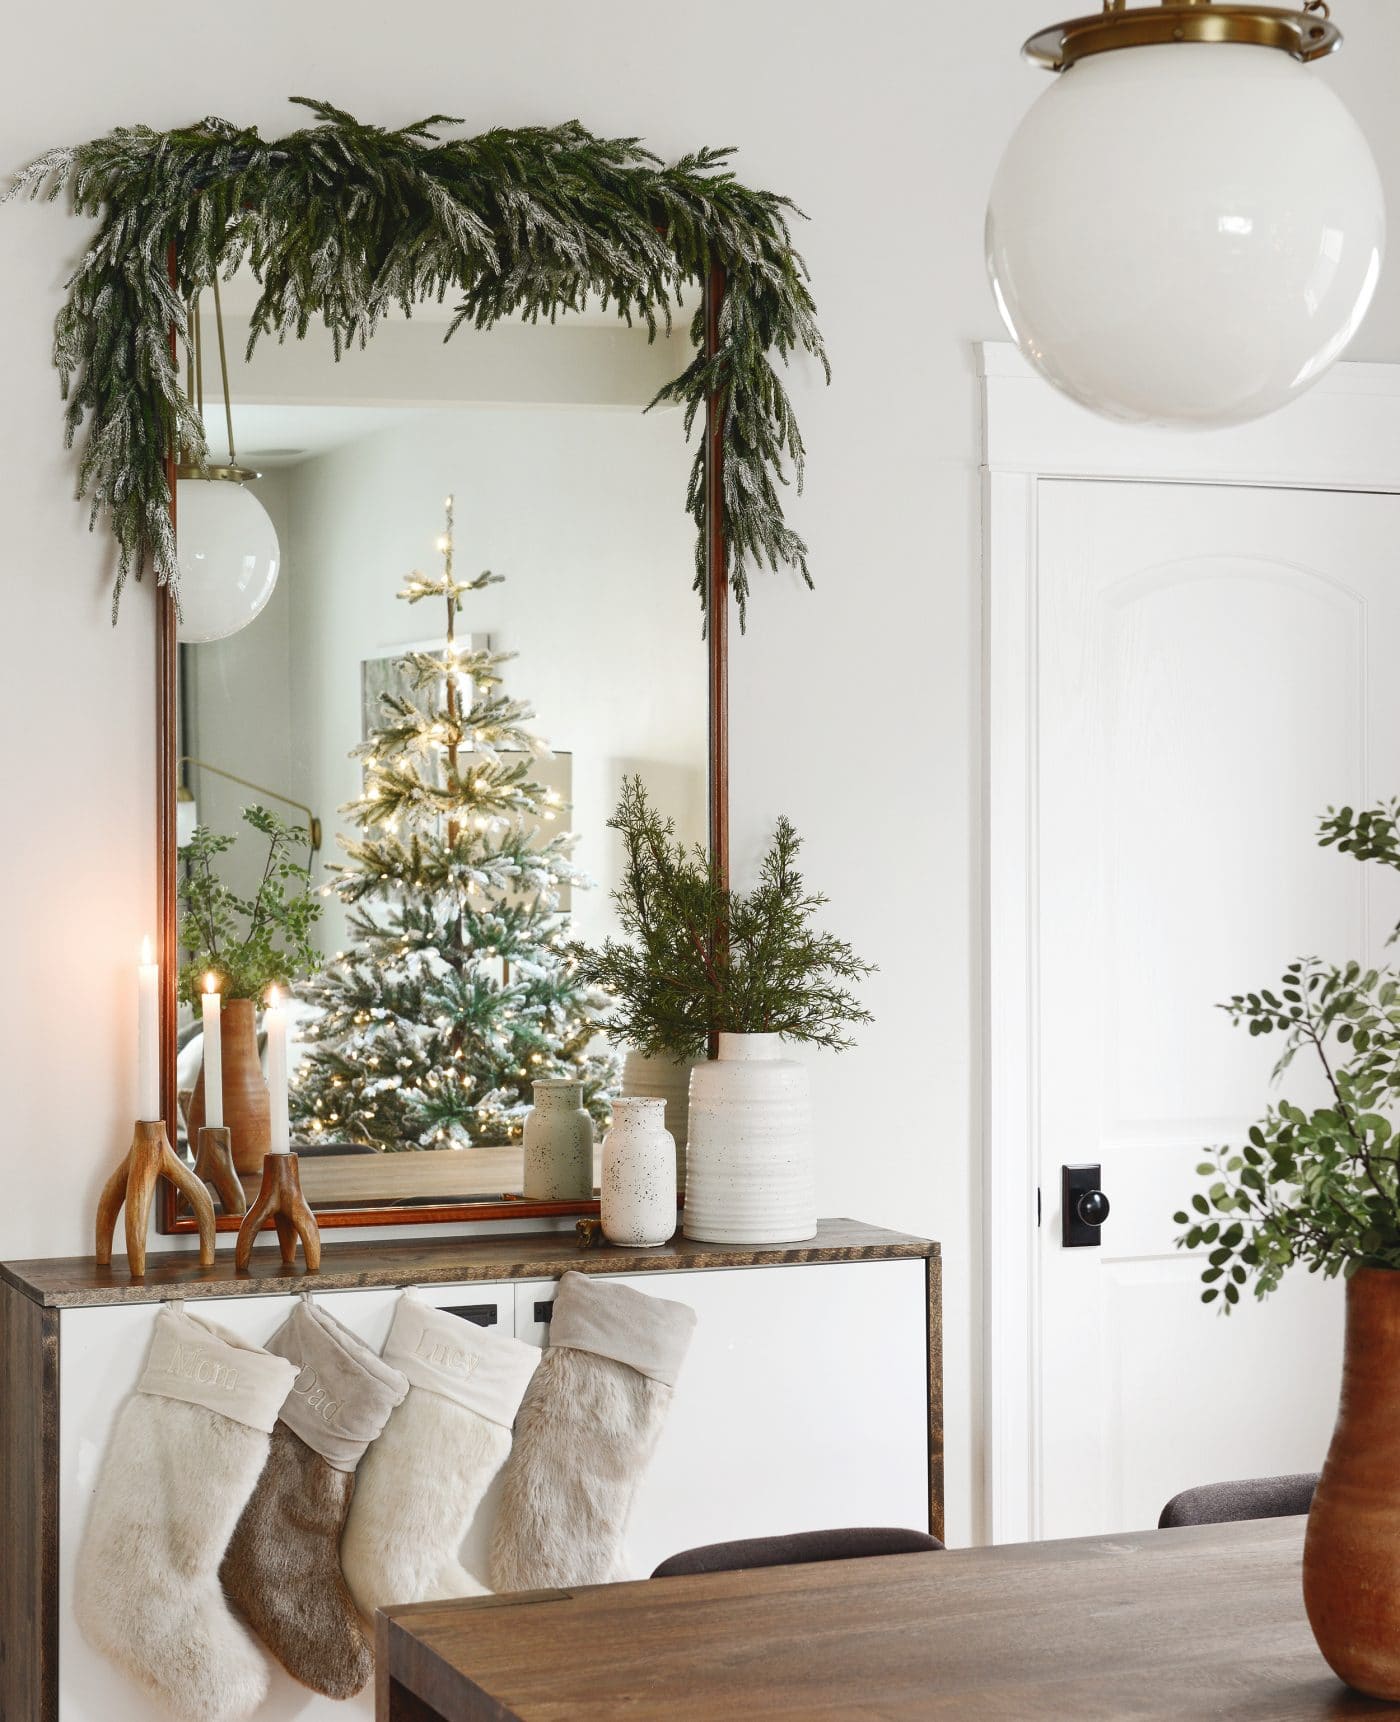 Living and dining room view with faux greenery | Which flocking spray is best? | How to flock your own holiday garland, tree and decor, via Yellow Brick Home